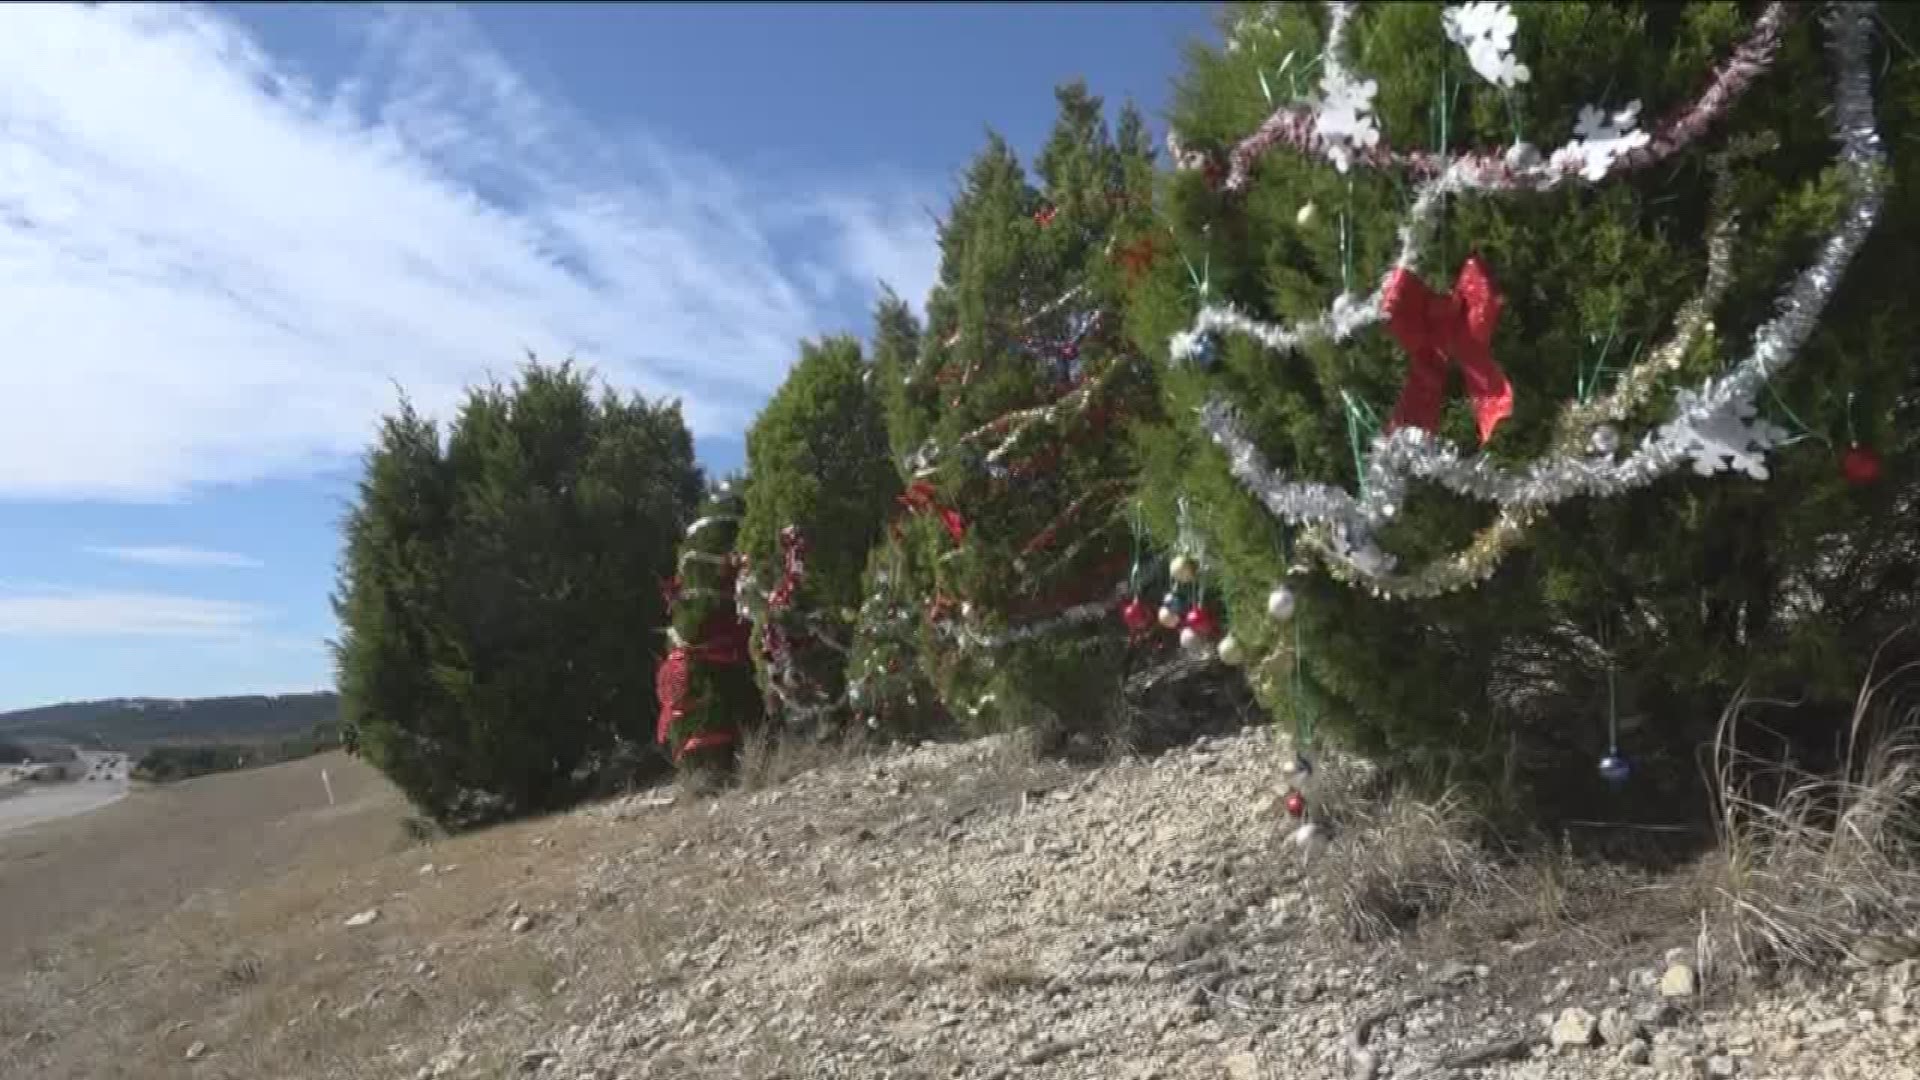 Whether you love the tradition or hate it, people are decorating the trees on Loop 360. Luis De Leon shows us how they're doing it in an eco-friendly way.